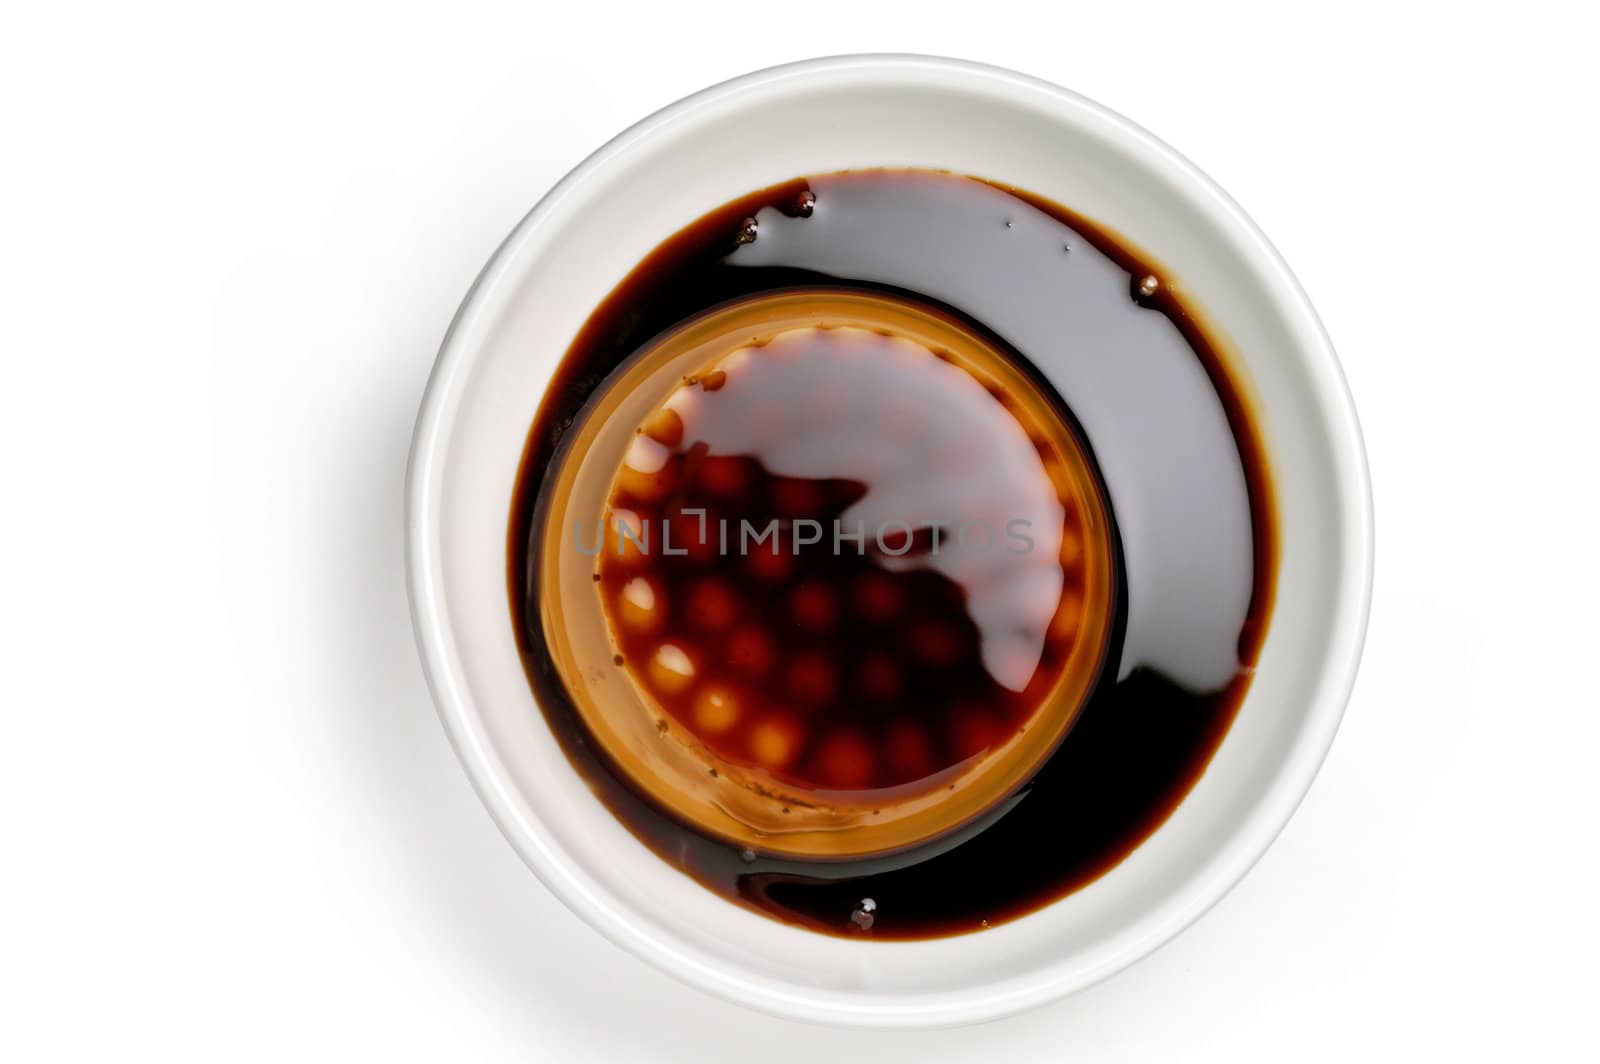 Coffee cream dessert closeup from top with clipping path